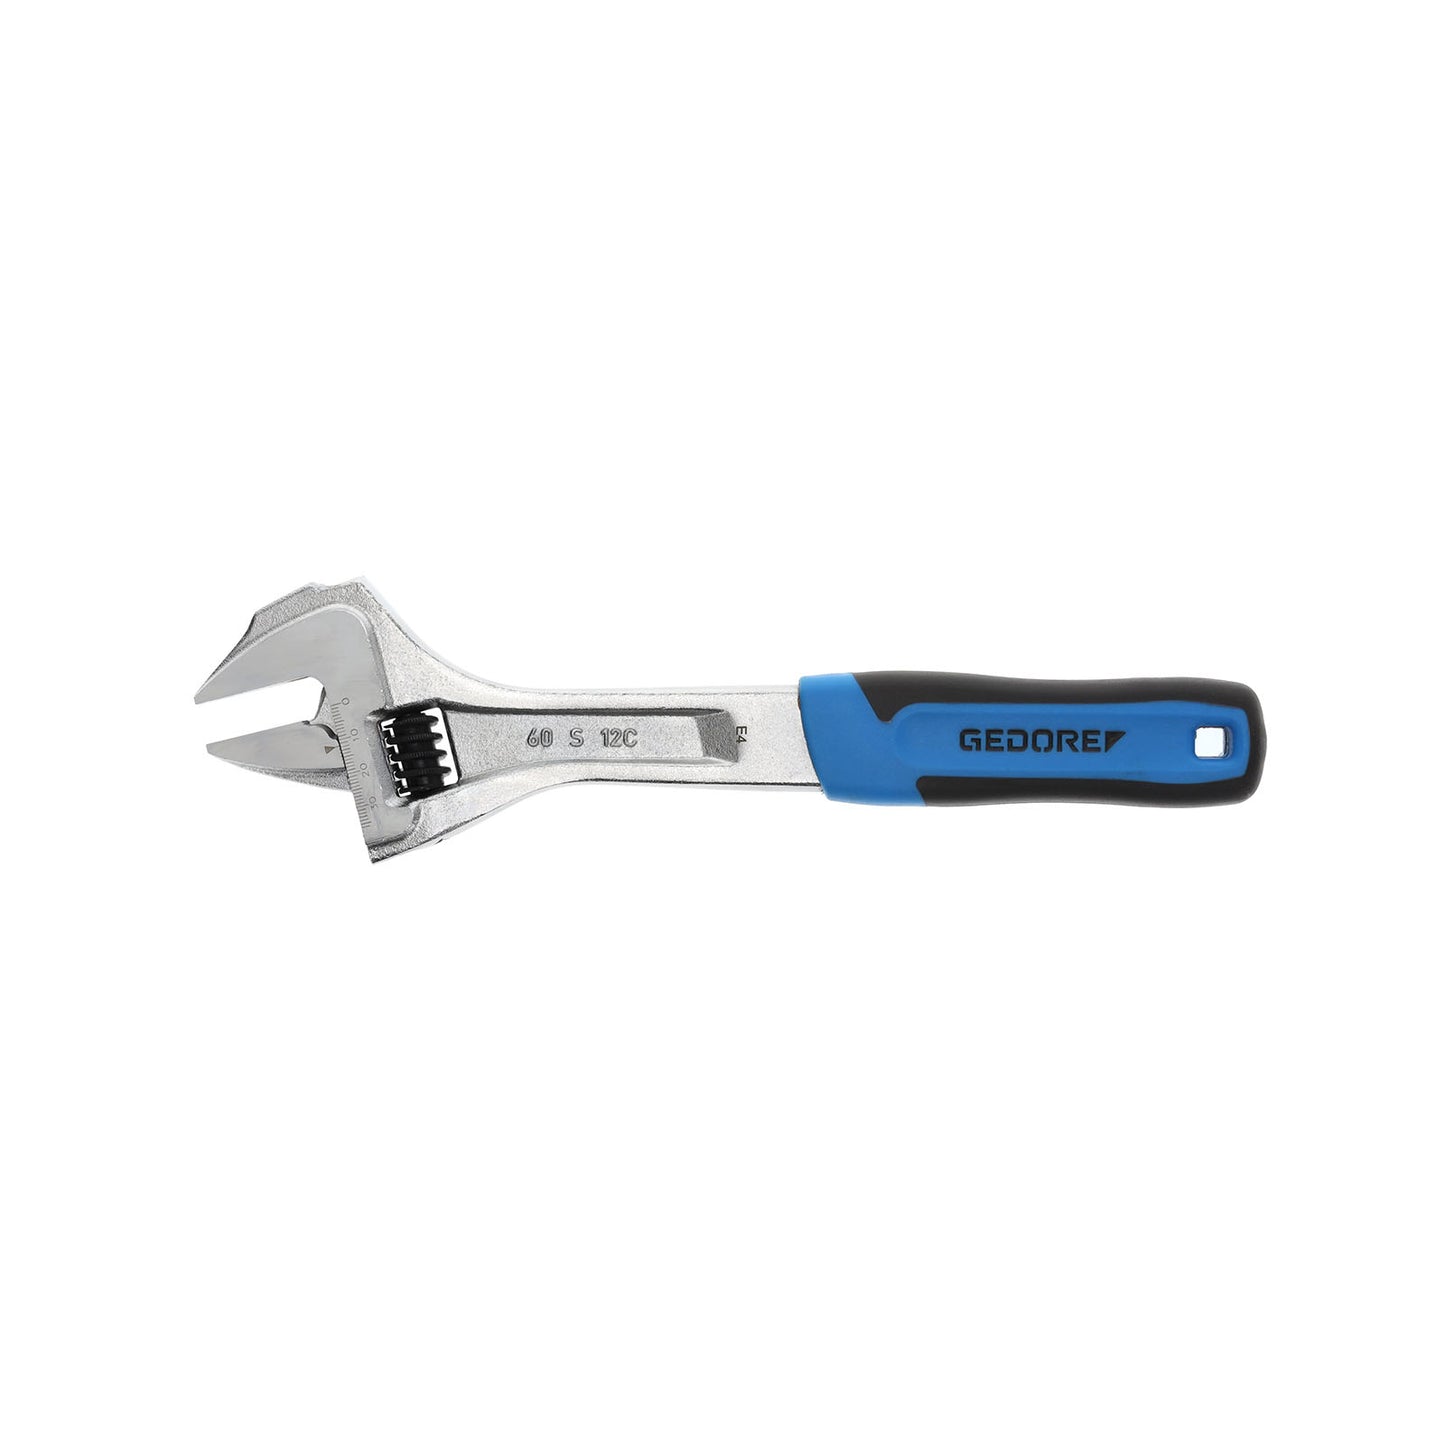 GEDORE 60 S 12 JC - Chrome Adjustable Wrench, 12" (2668904)